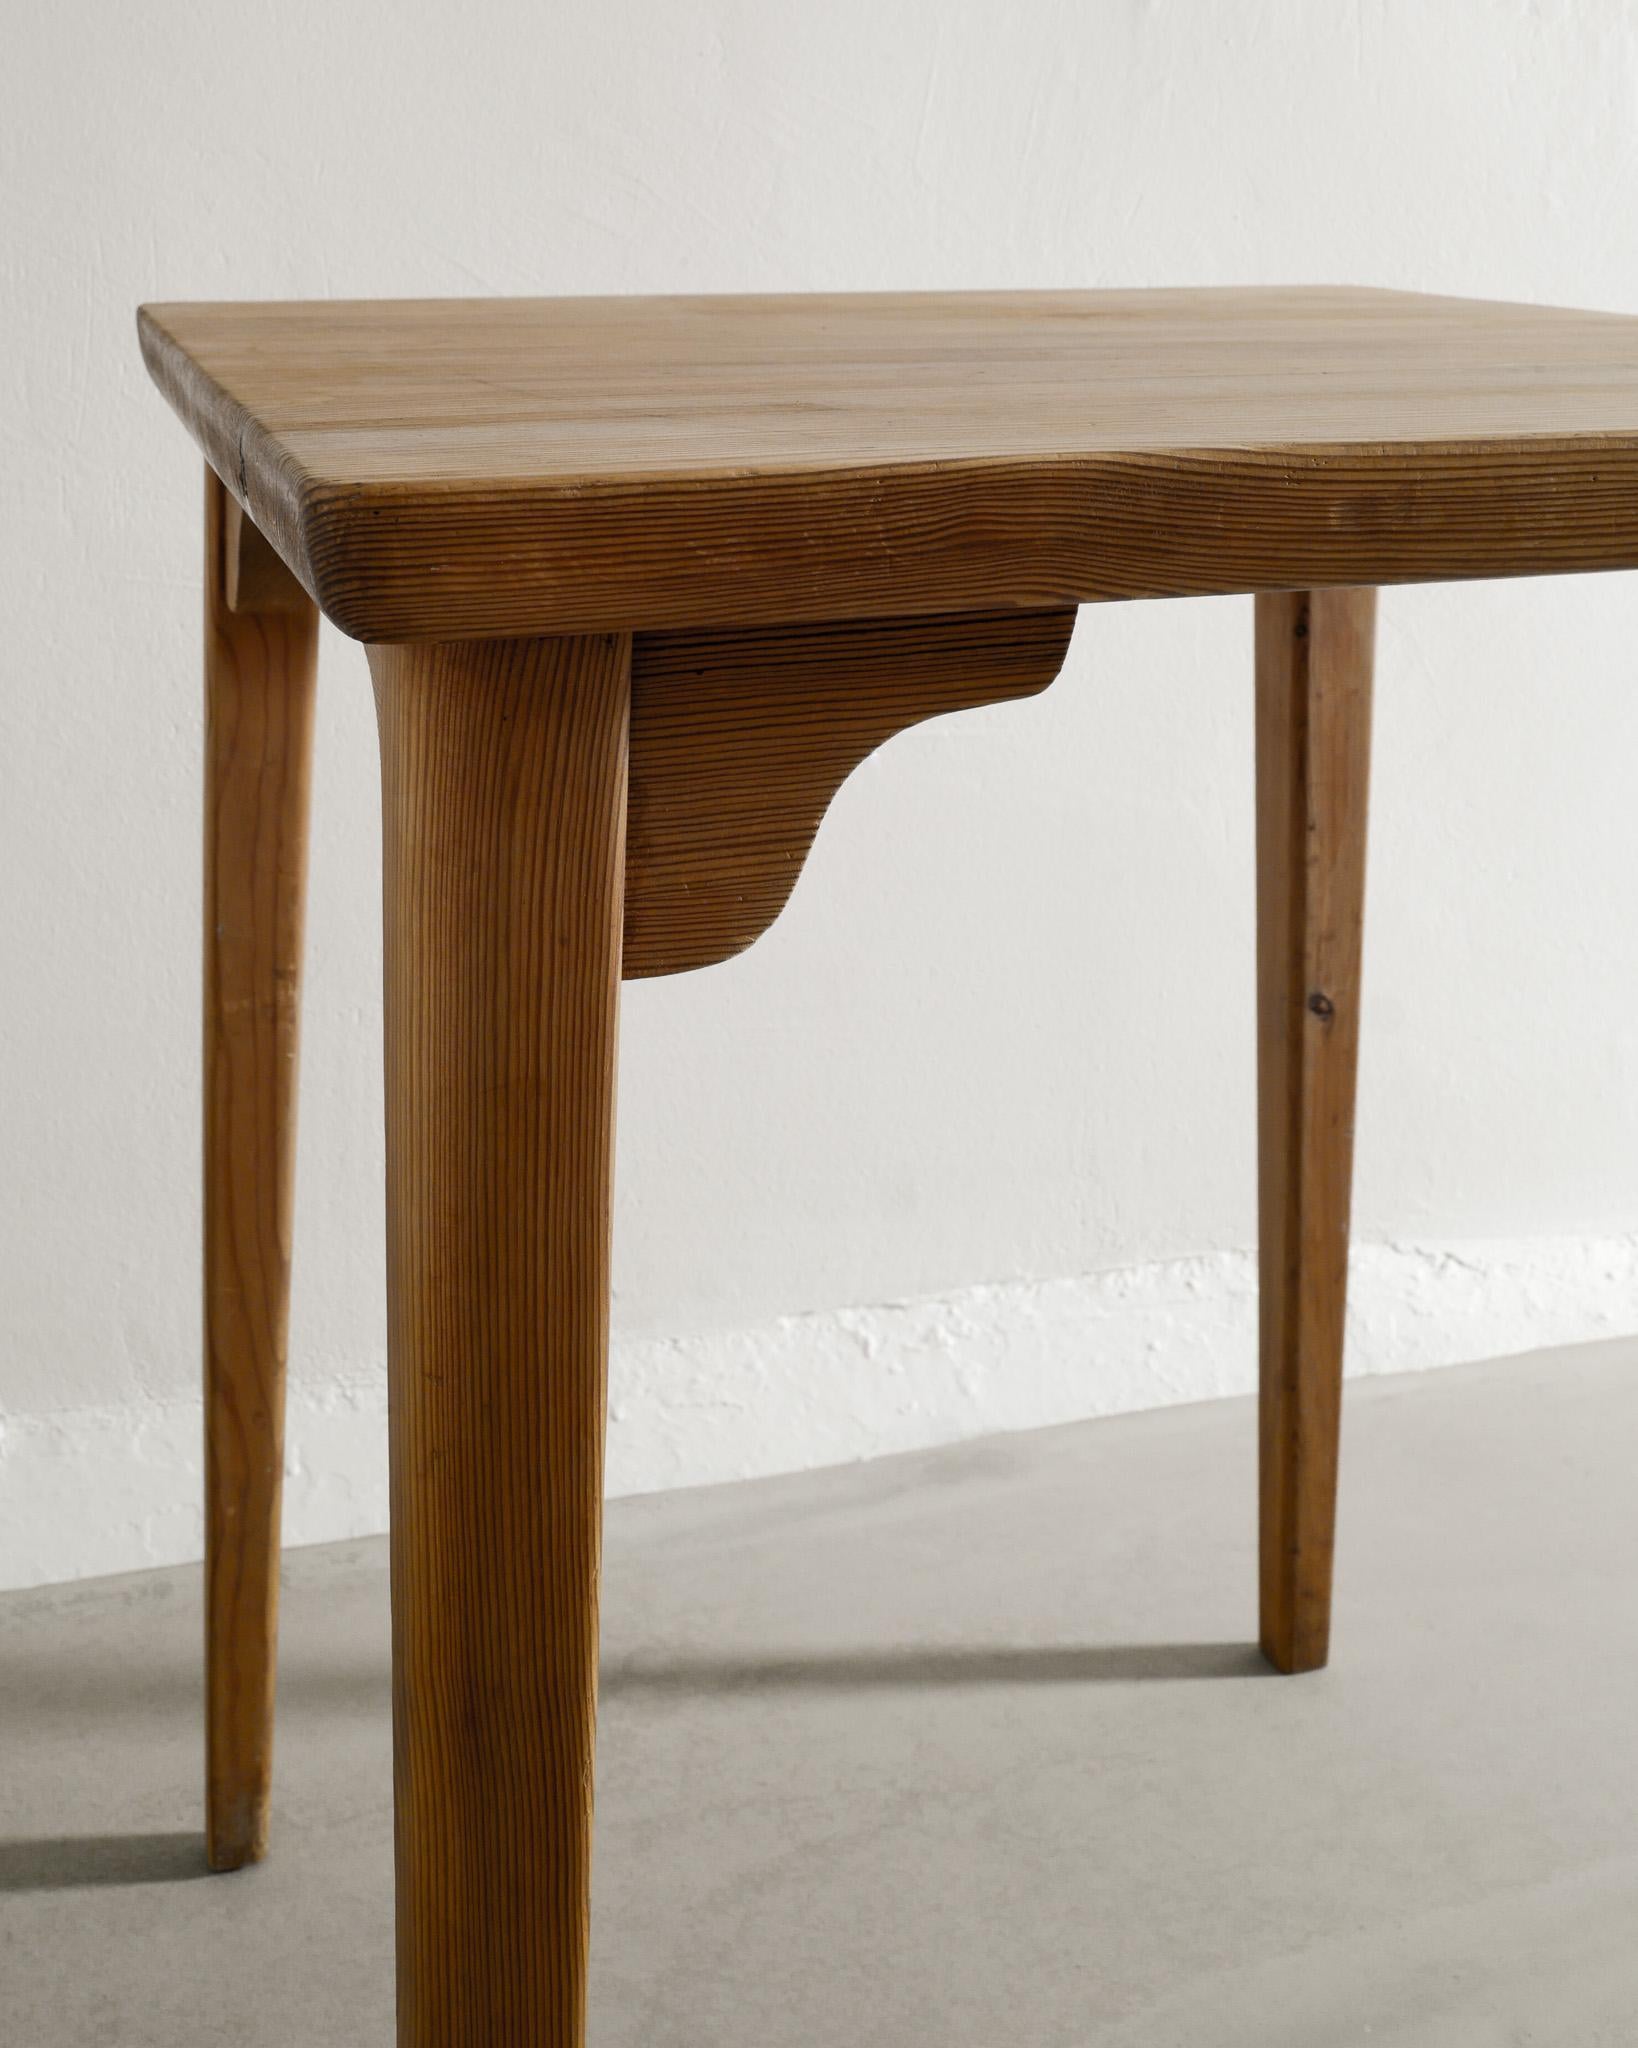 Mid-20th Century Swedish Wooden Side Dining Table in Pine Produced by Nordiska Kompaniet, 1940s For Sale